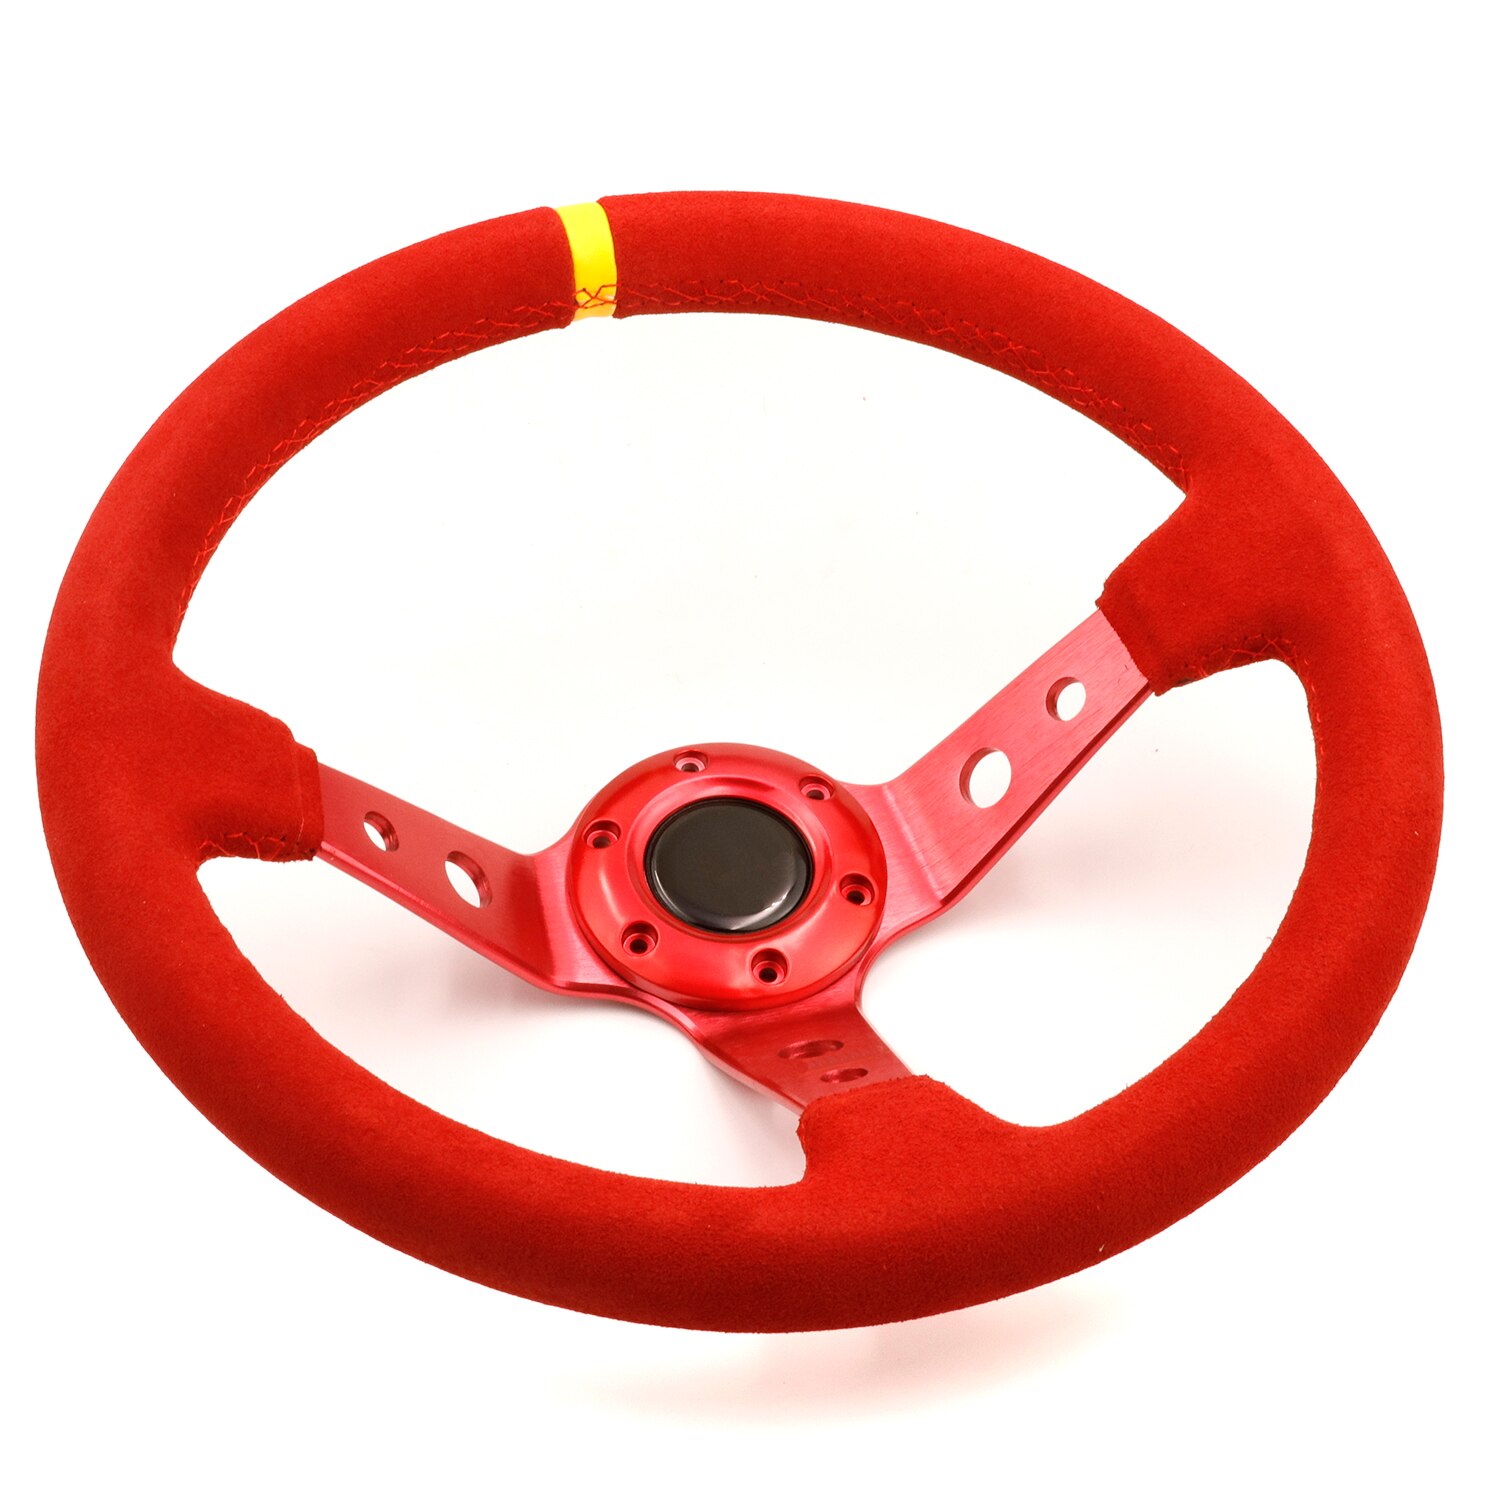 14inch Auto jdm Red Suede Leather Deep Dish Drift Sport Steering Wheels